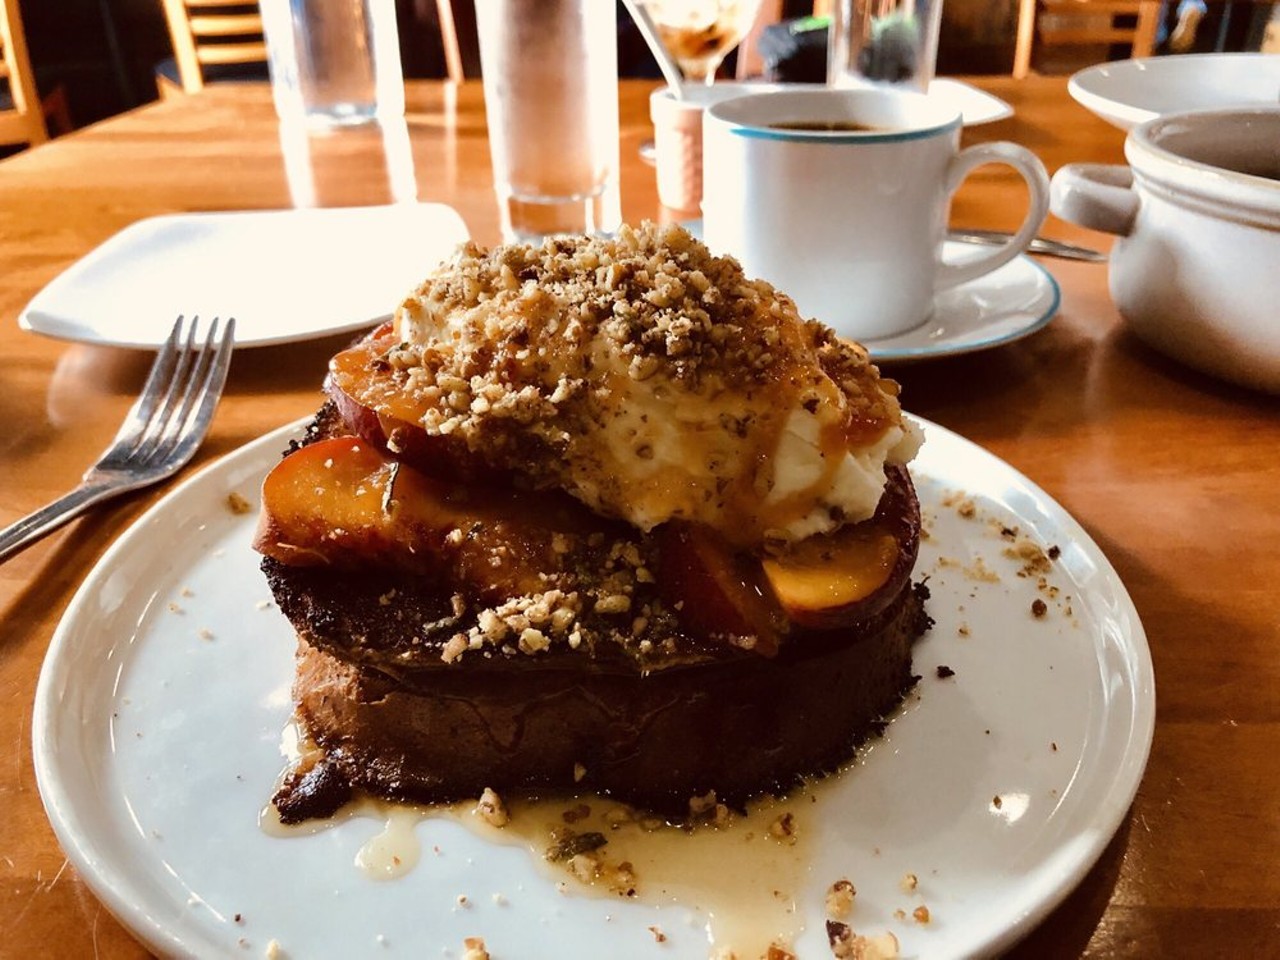 Meadow Neighborhood Eatery + Bar's peach french toast with fresh peaches on homemade bread... so delectable!